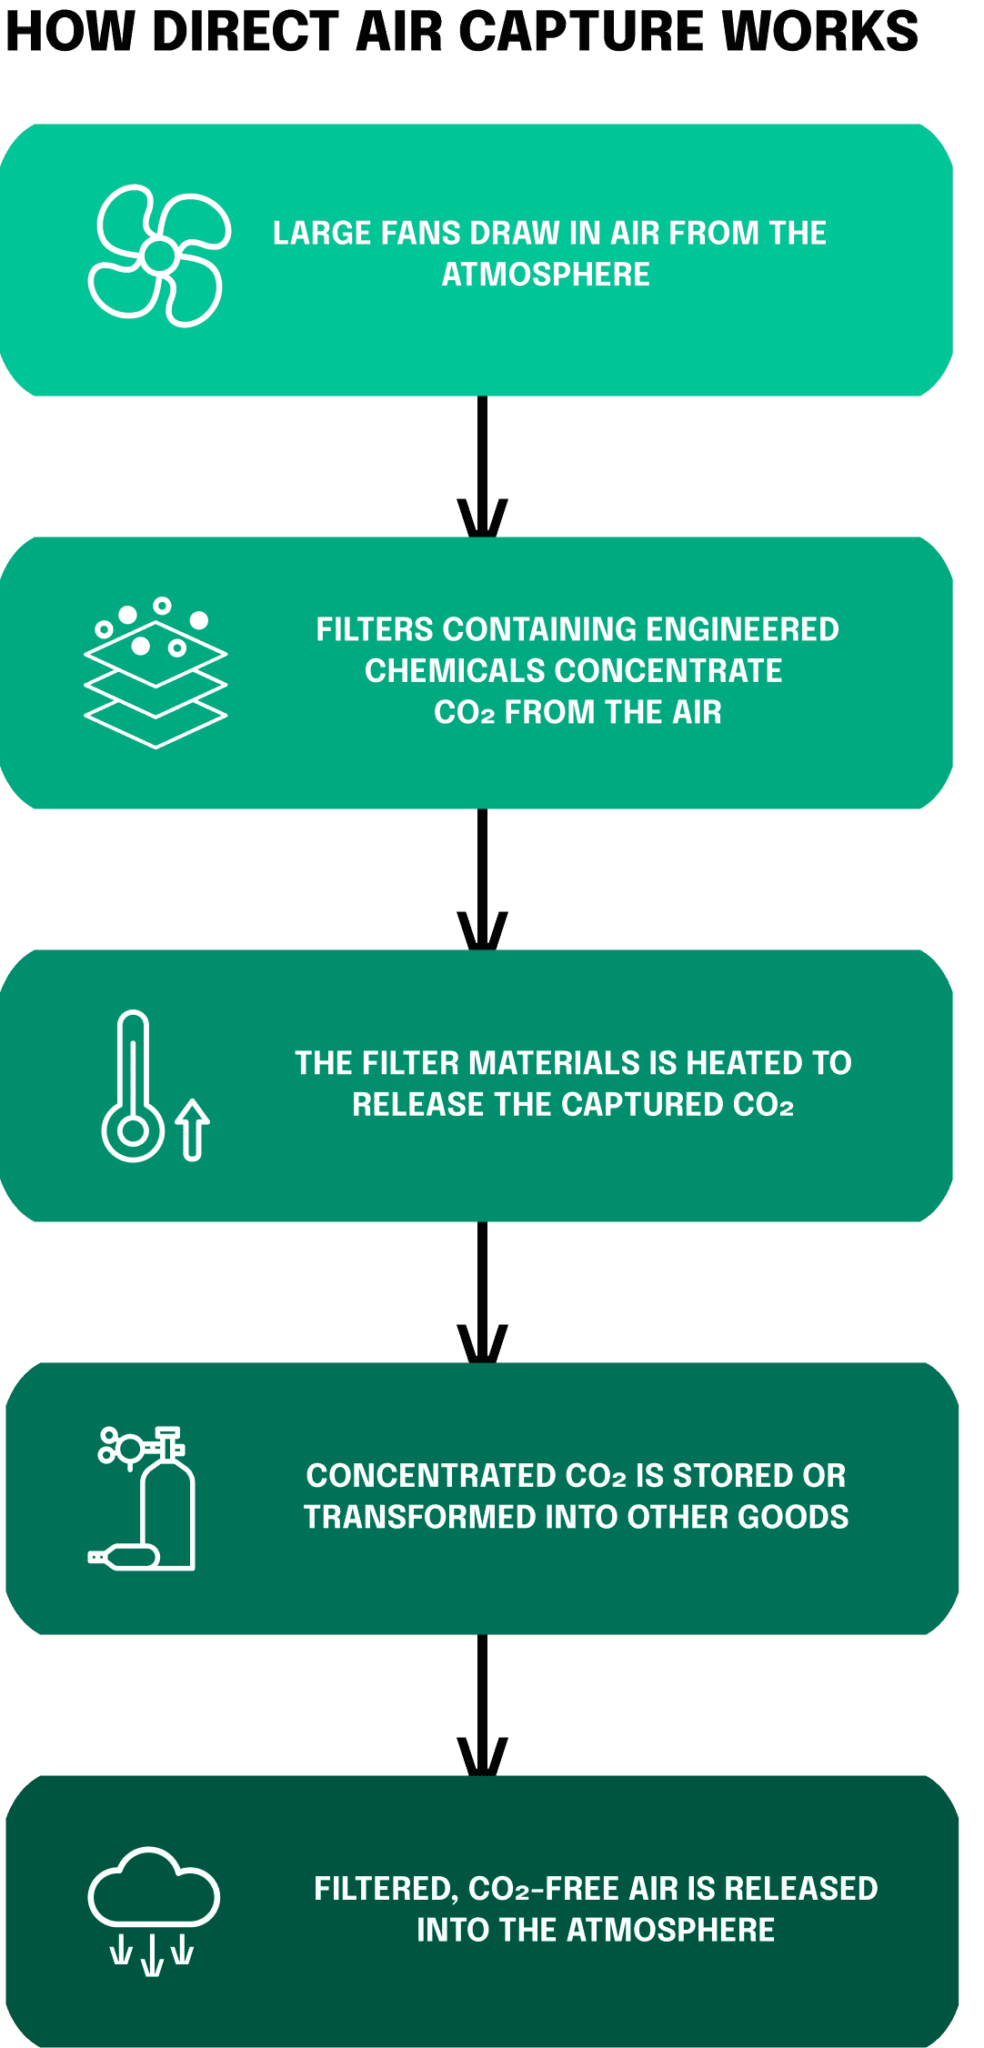 DACS is a technology that captures CO₂ directly from the ambient air using chemical processes. Once captured, the CO₂ is compressed and stored underground in geological formations or utilized in various applications. DACS holds the potential to remove vast amounts of CO₂ from the atmosphere.